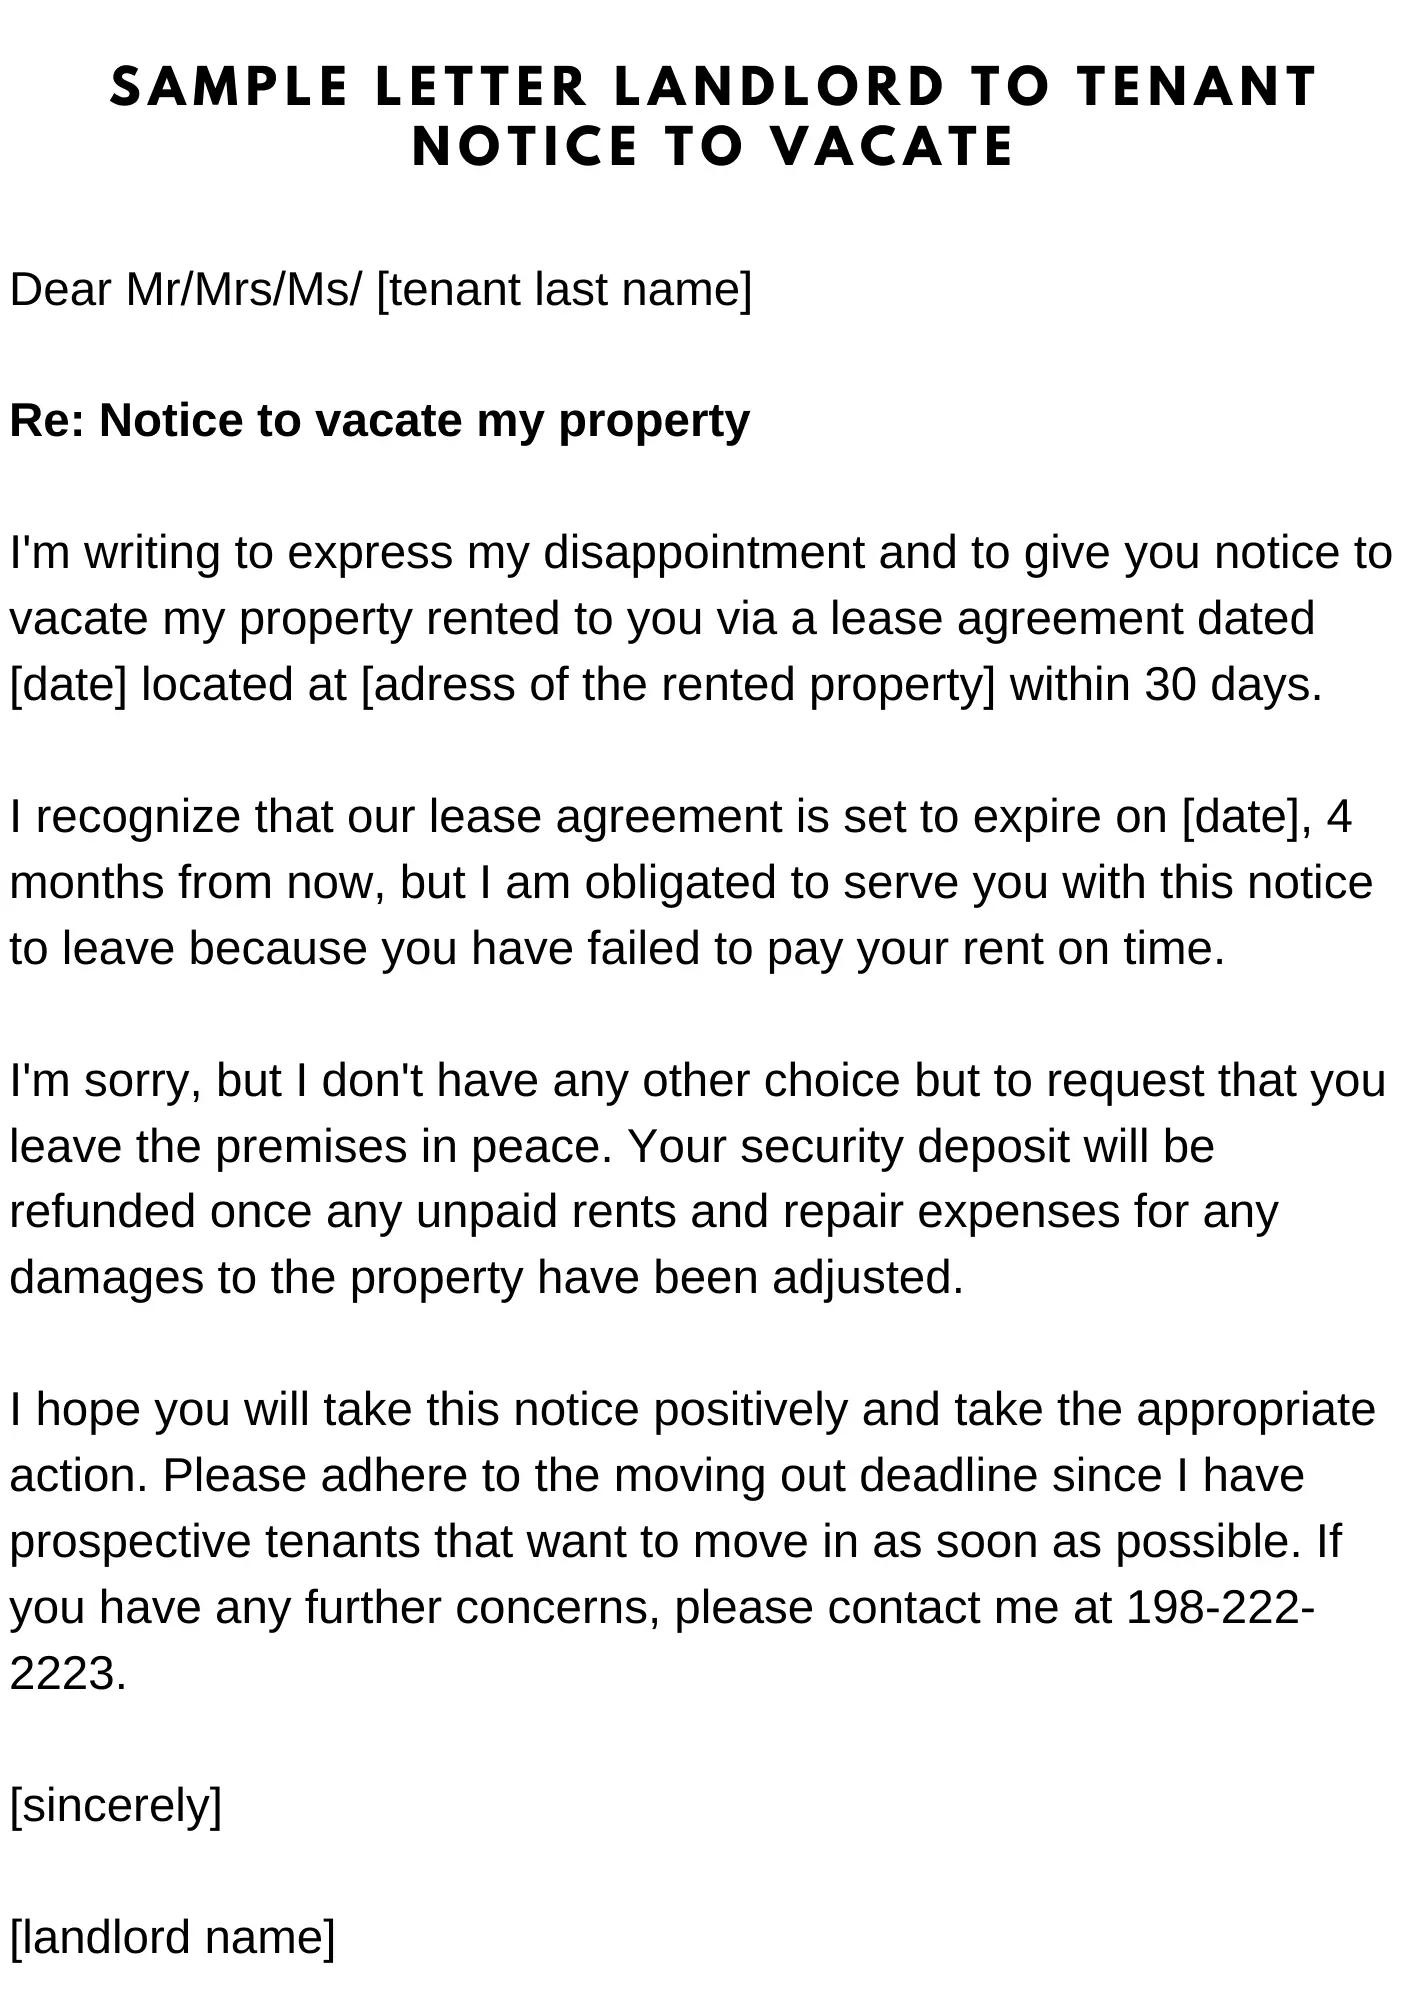 sample notice to tenant to vacate